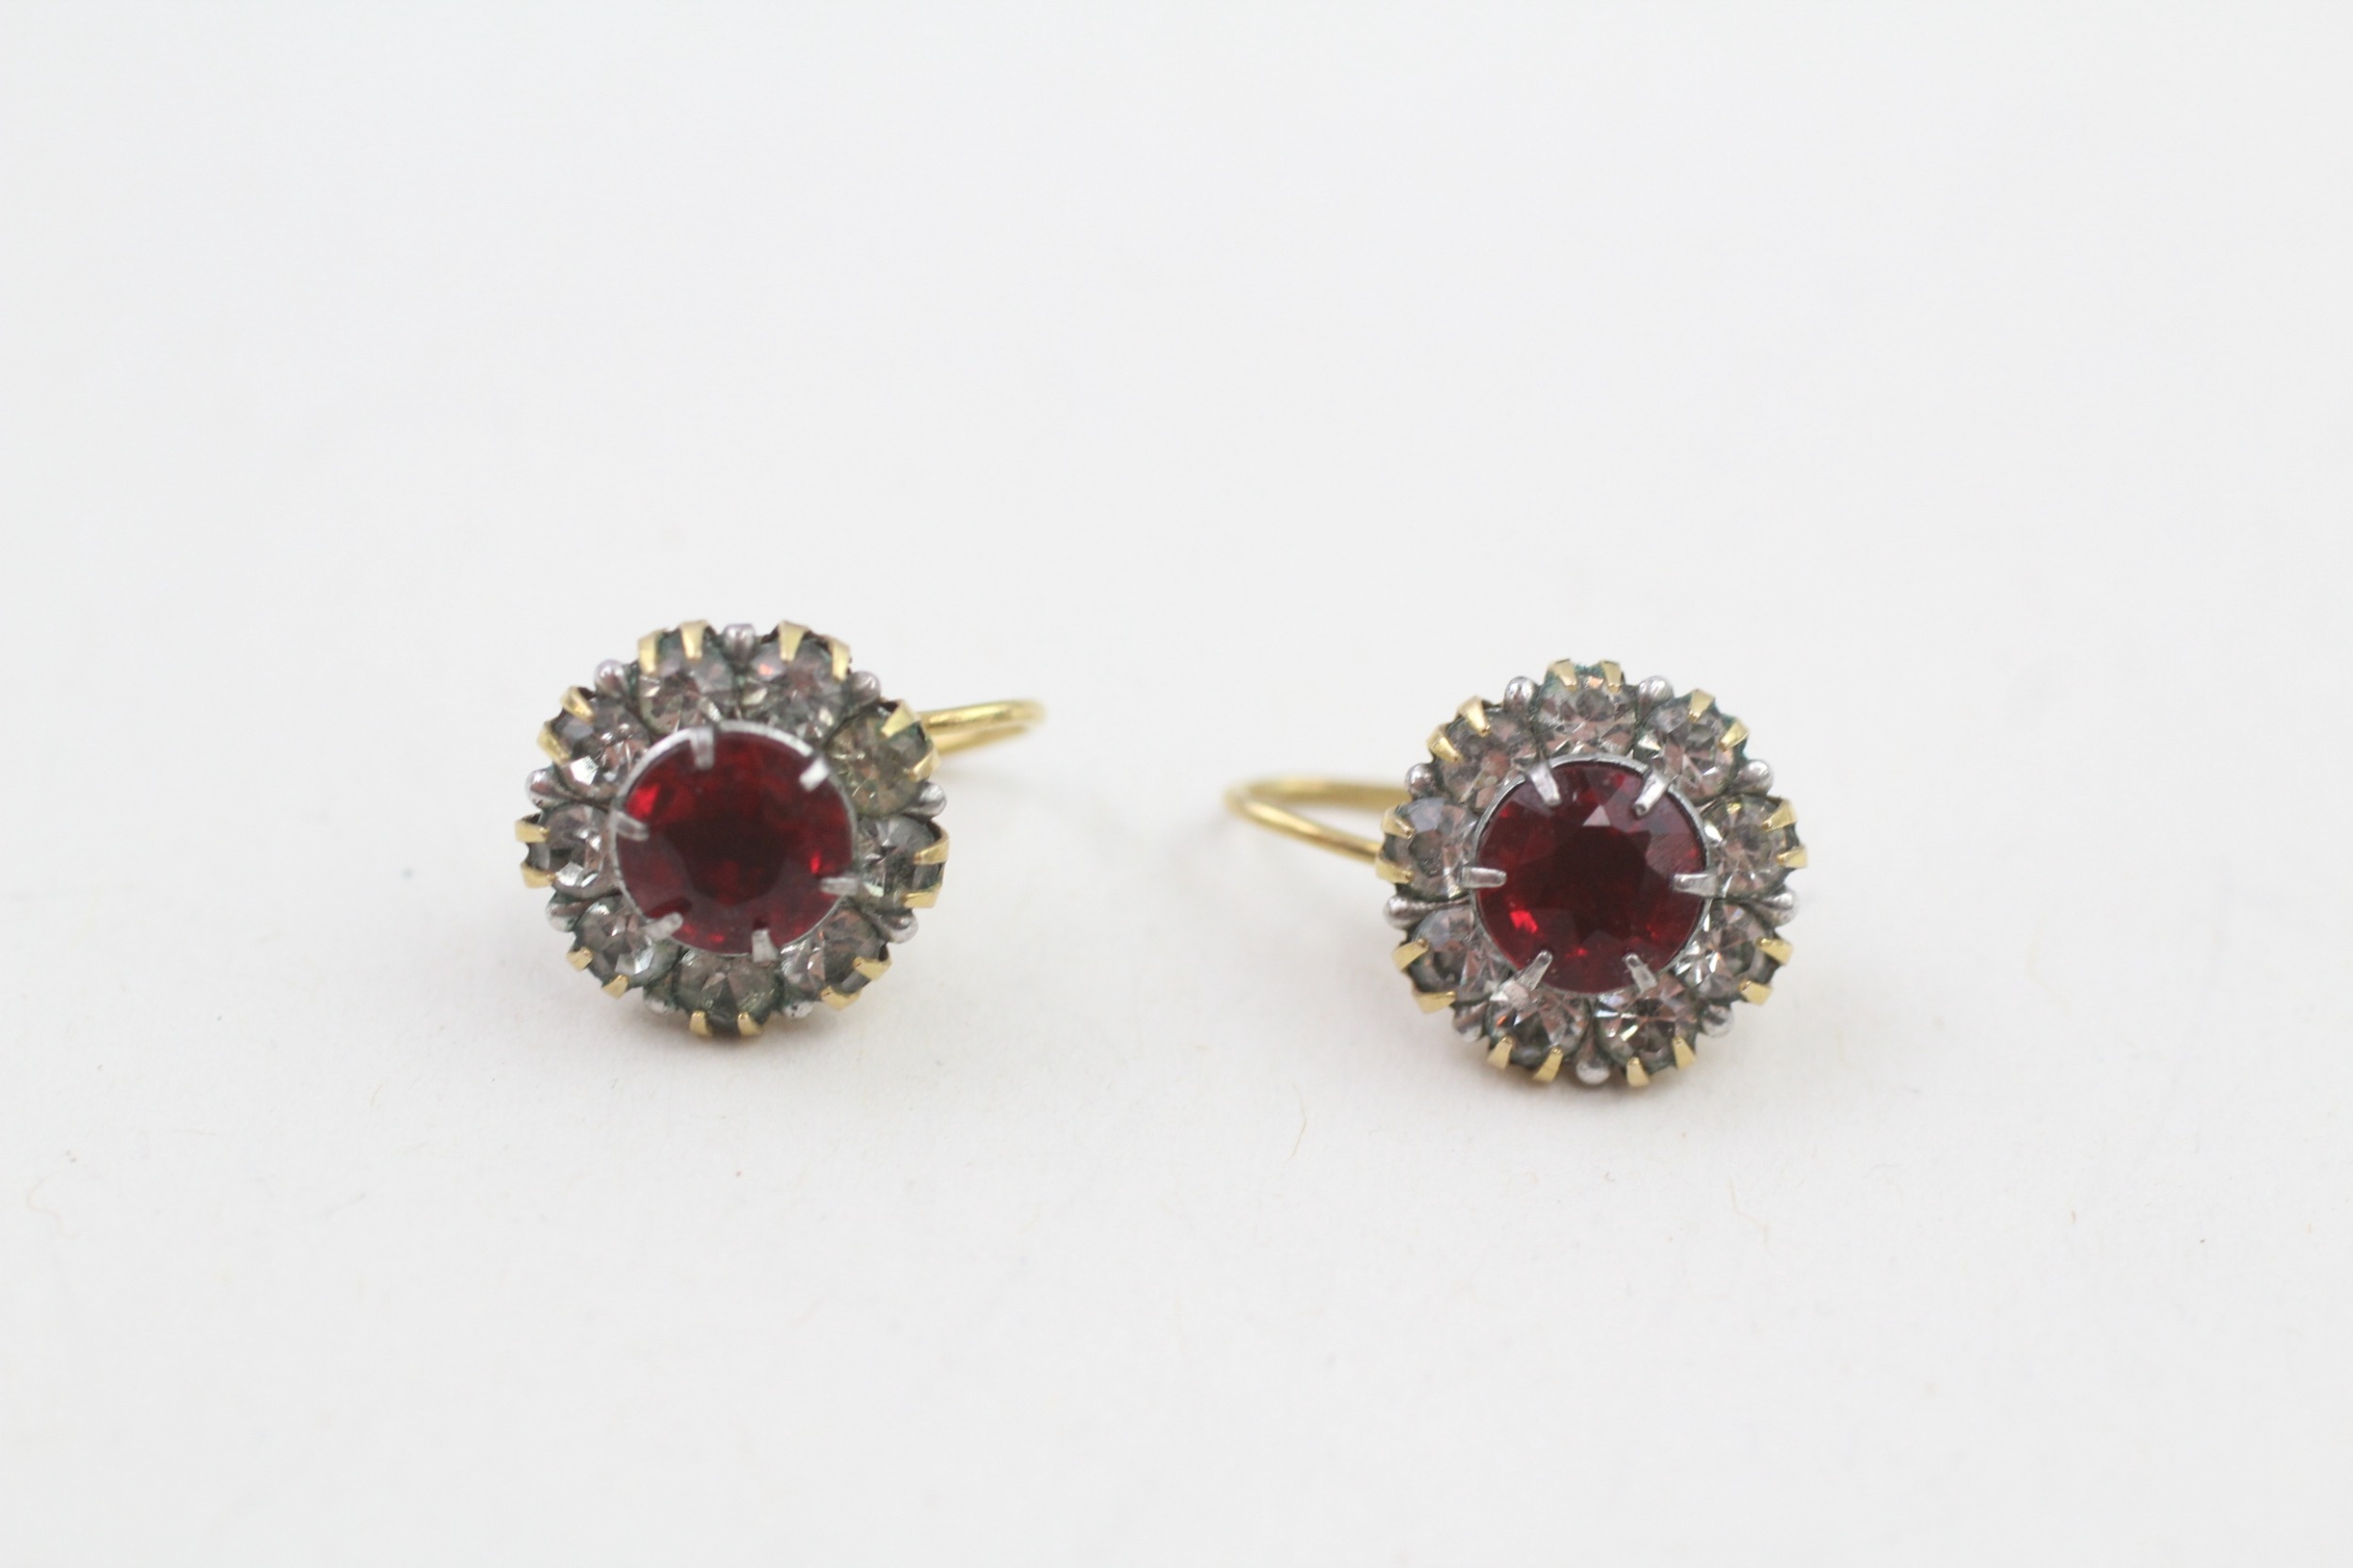 9ct gold antique red & white paste earrings (1.2g)